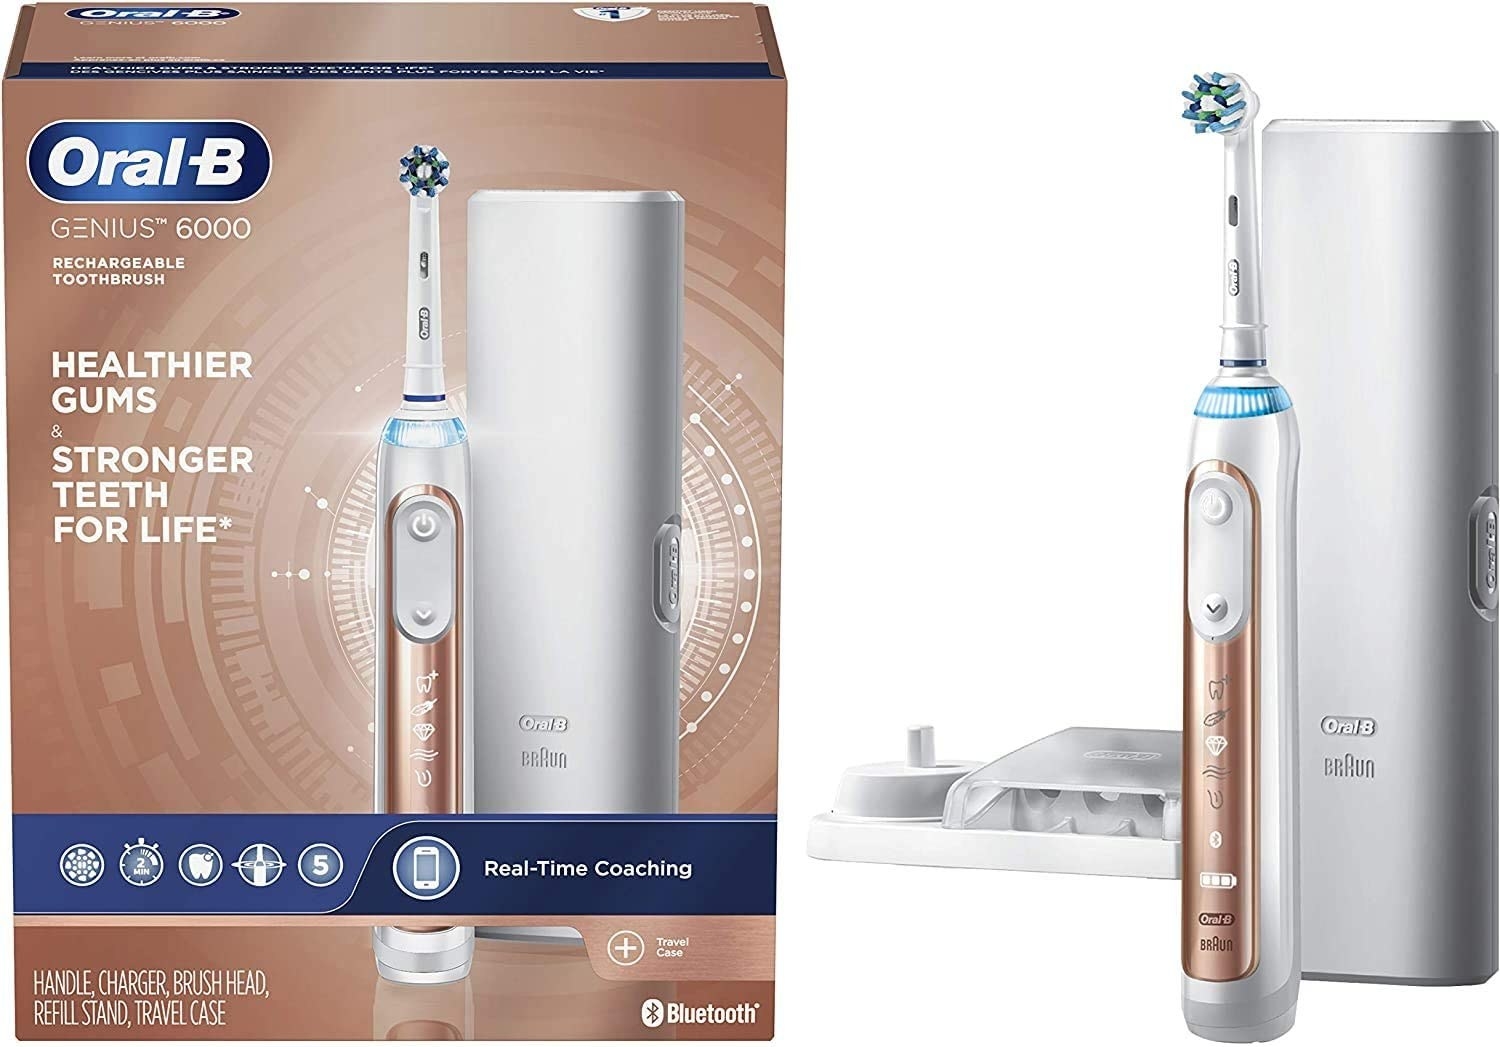 An electric toothbrush on a plain background